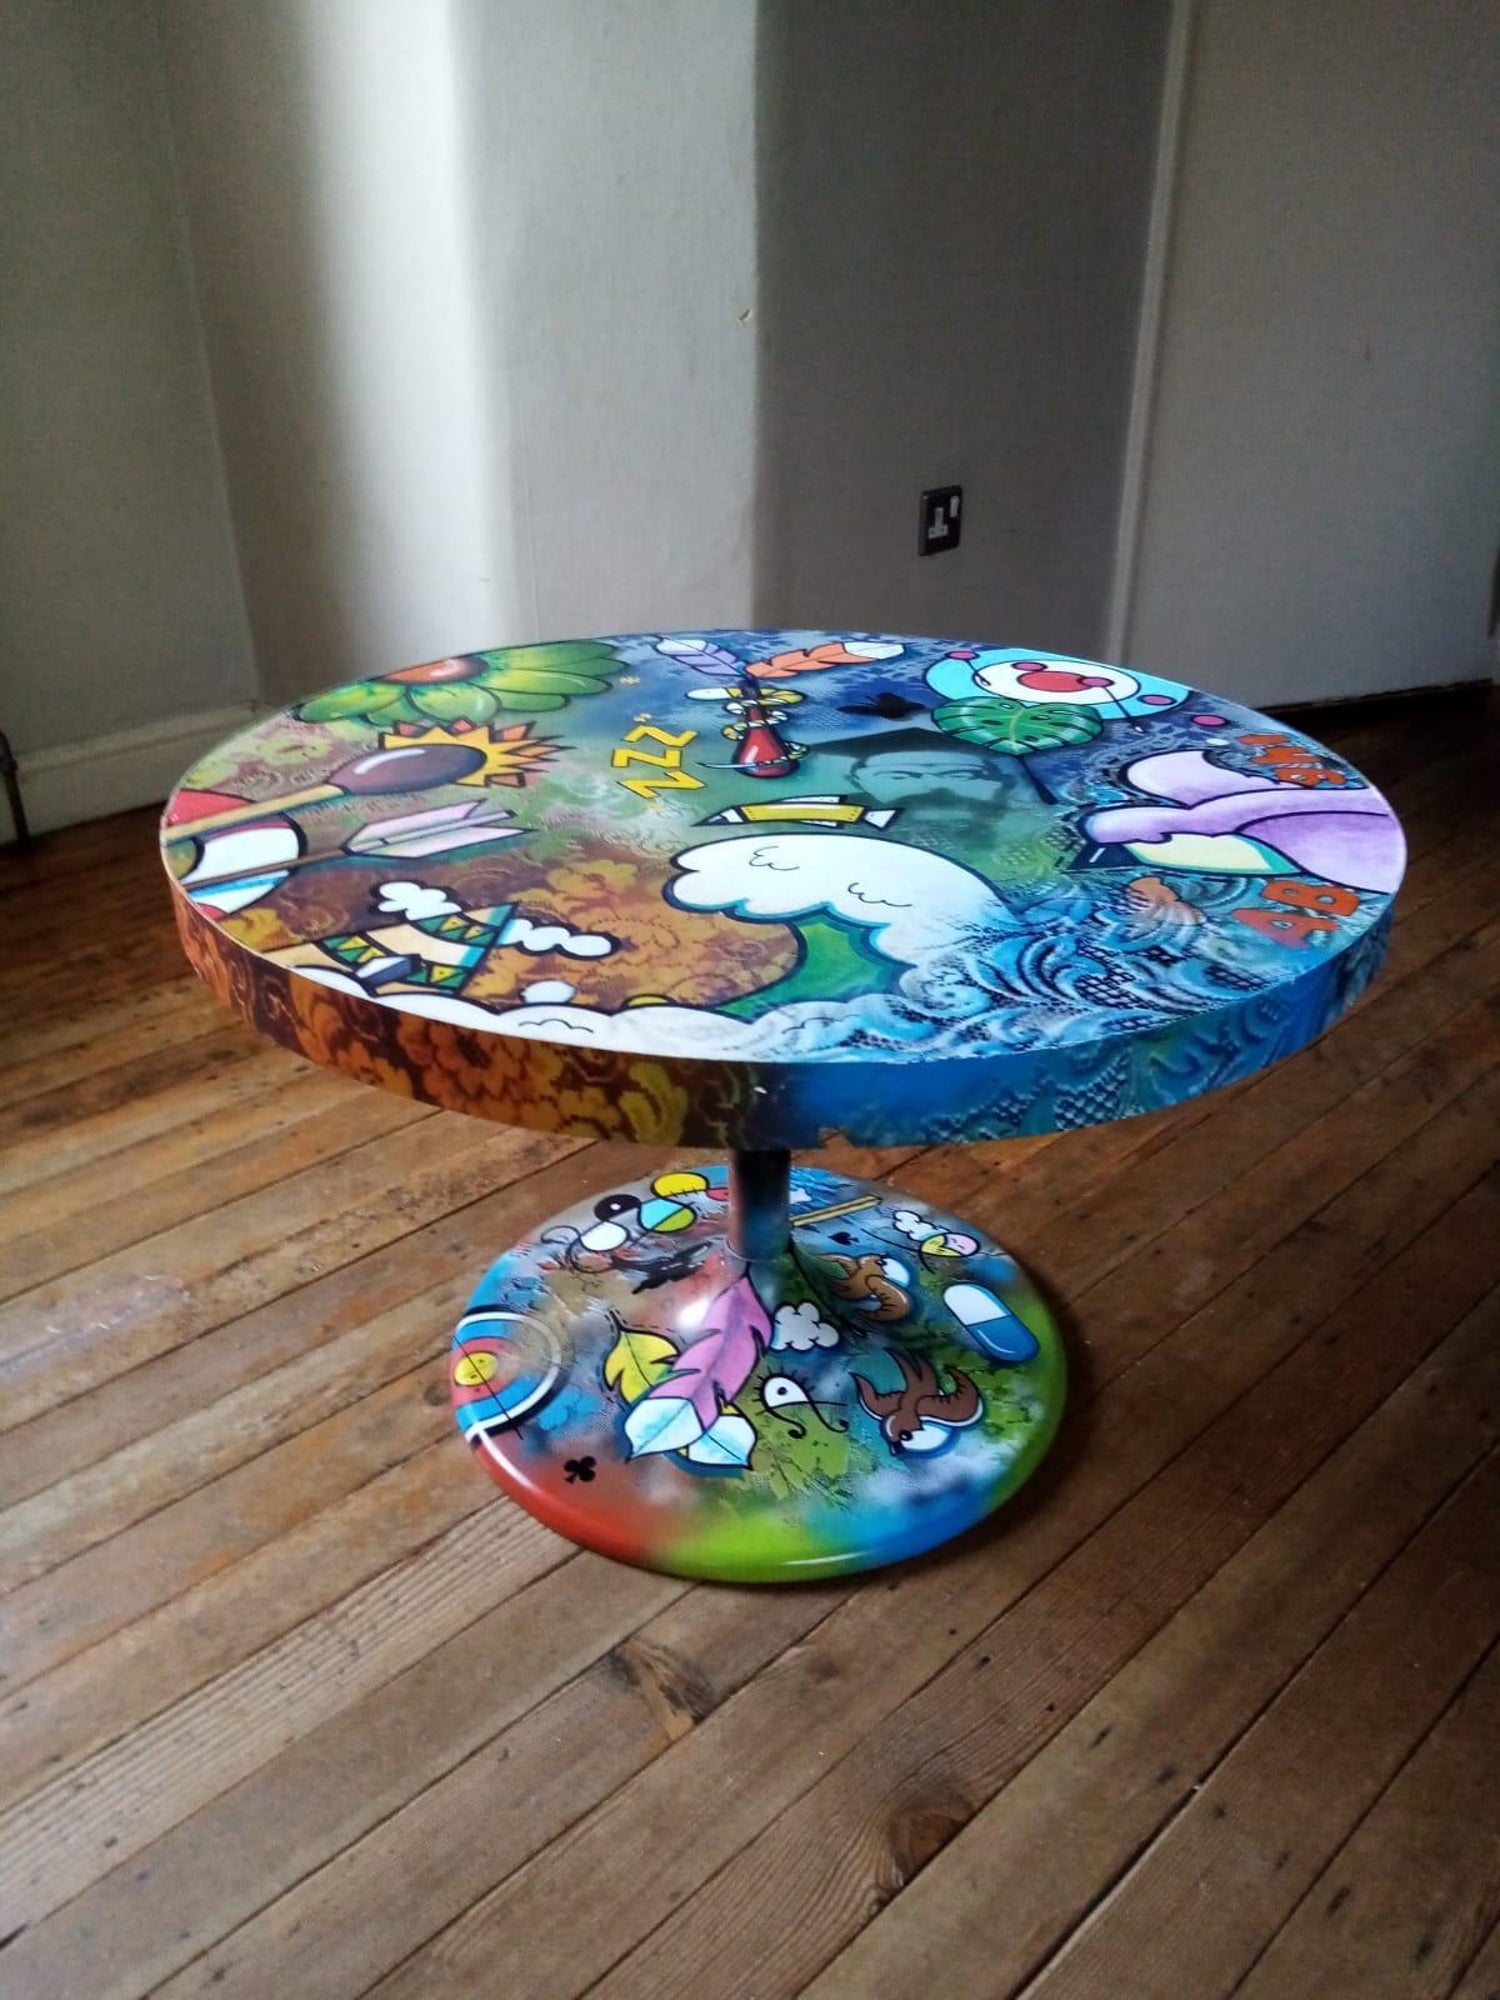 acrylic paint on wooden table